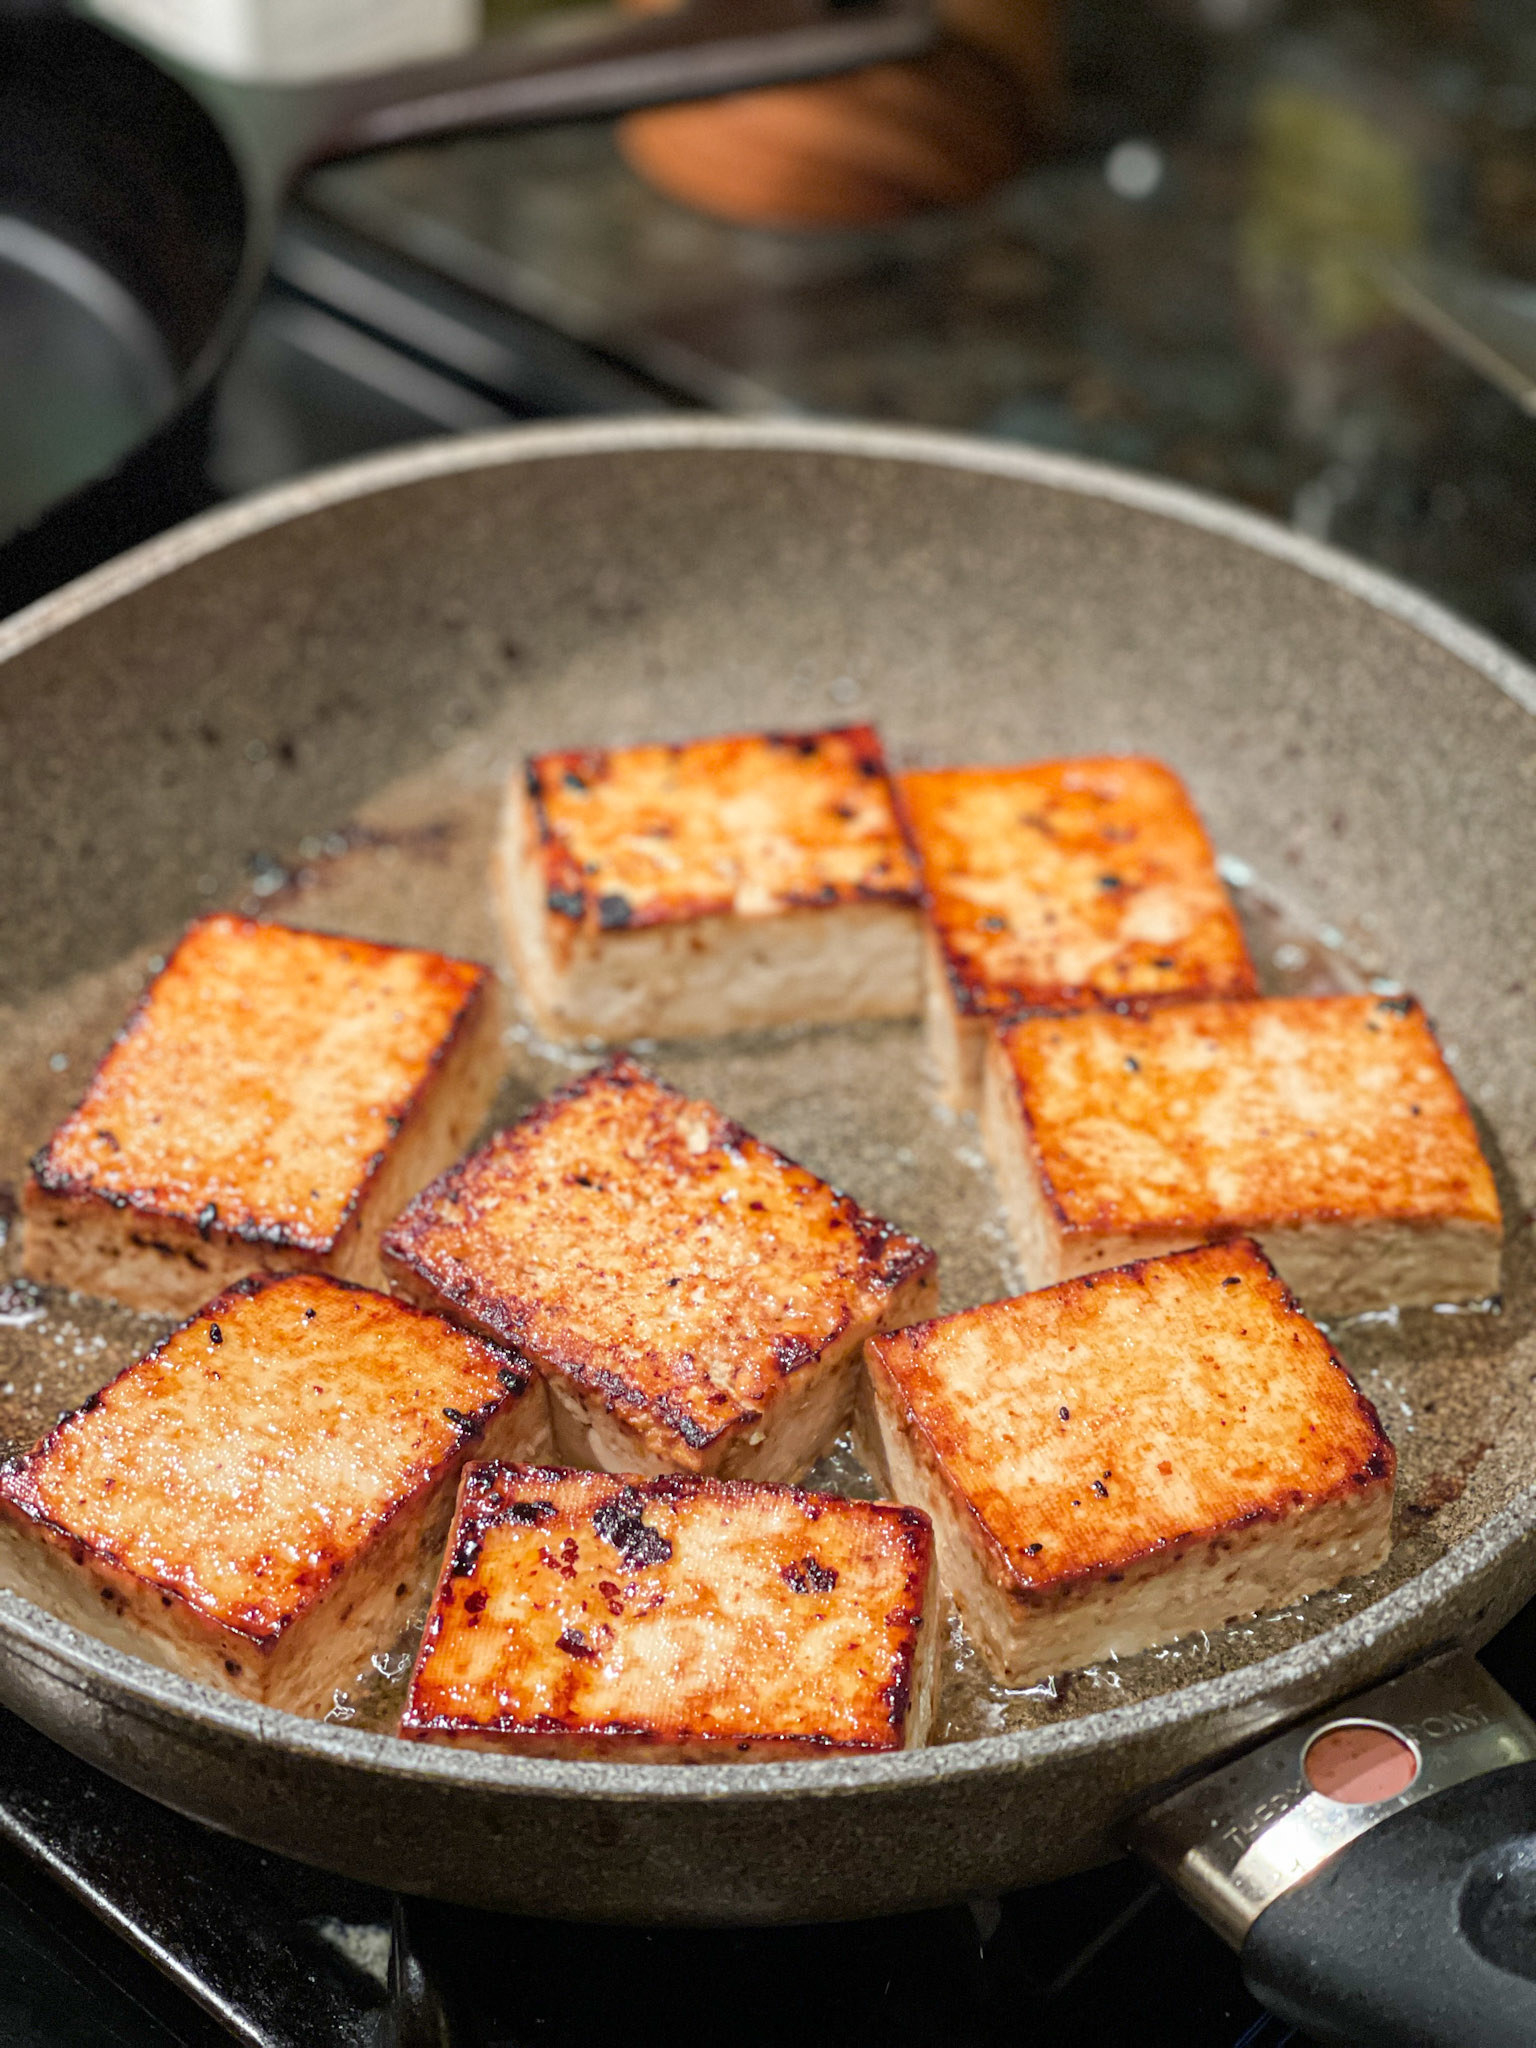 slices of tofu in a nonstick skillet that are frying on one side and golden brown and crispy on the other